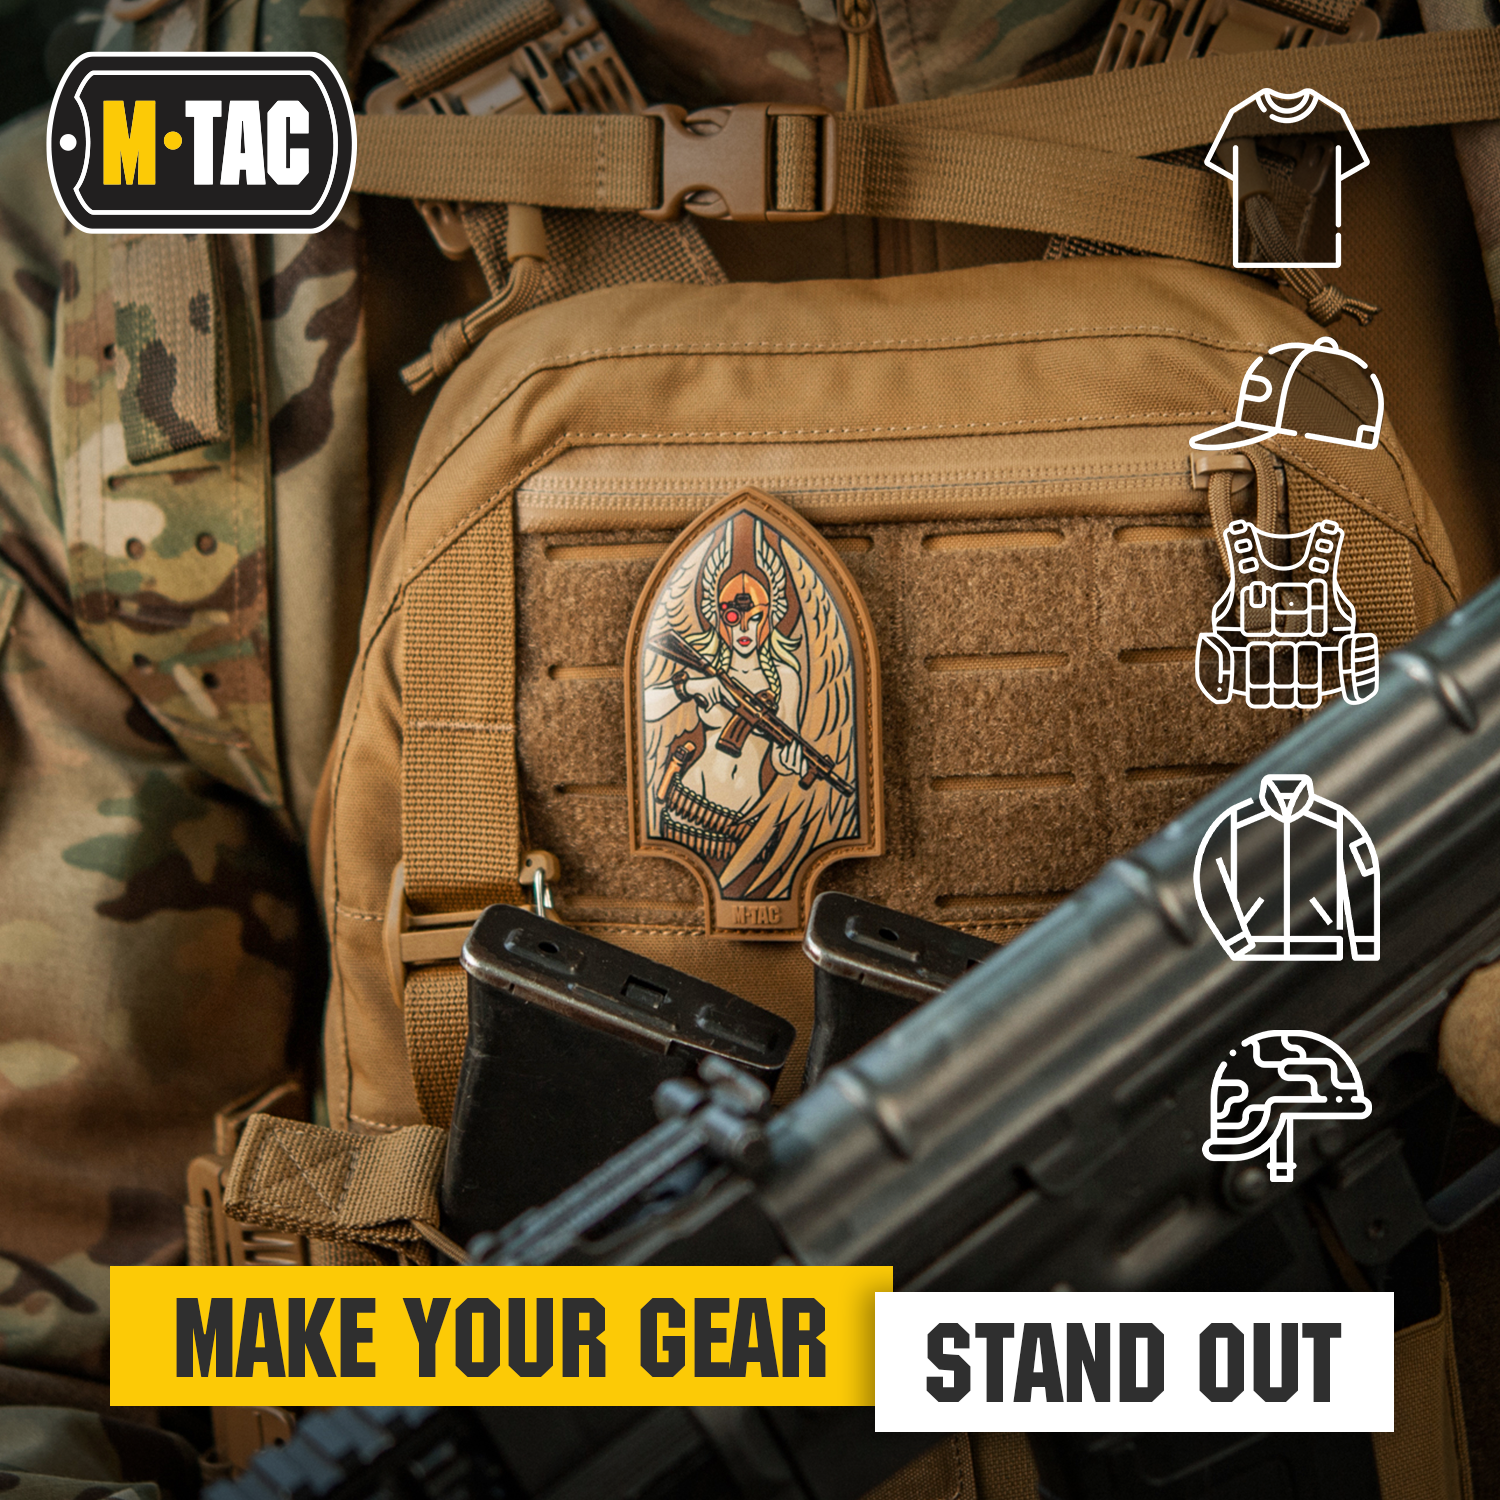 Morale Patches: What They Are and Everything You Need to Know – M-TAC